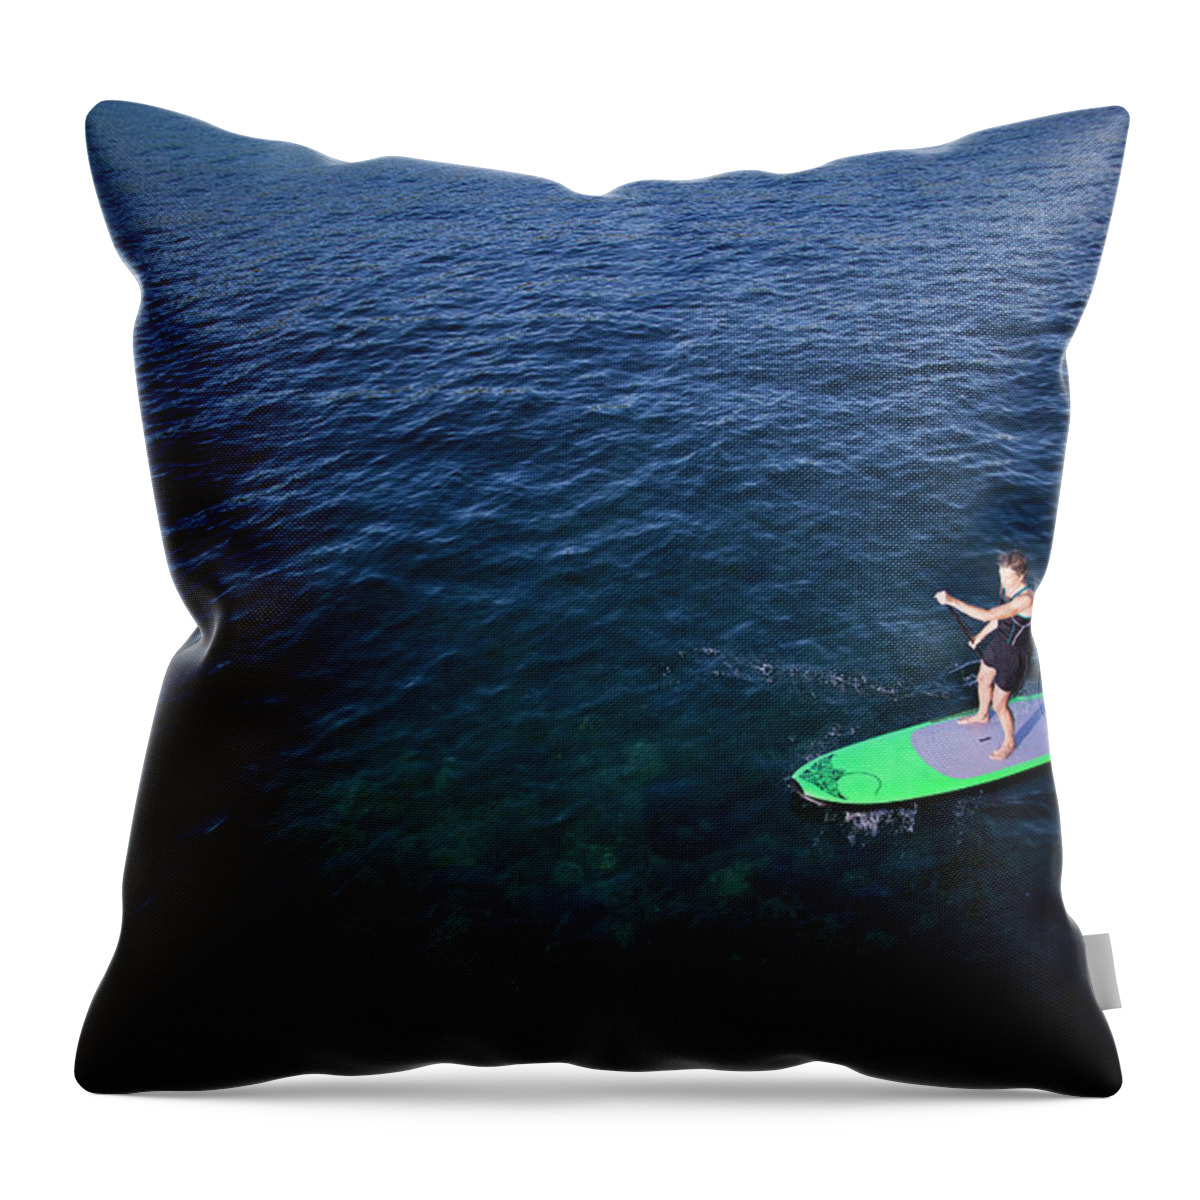 Horizontal Throw Pillow featuring the photograph Paddle Boarder by Ben Girardi